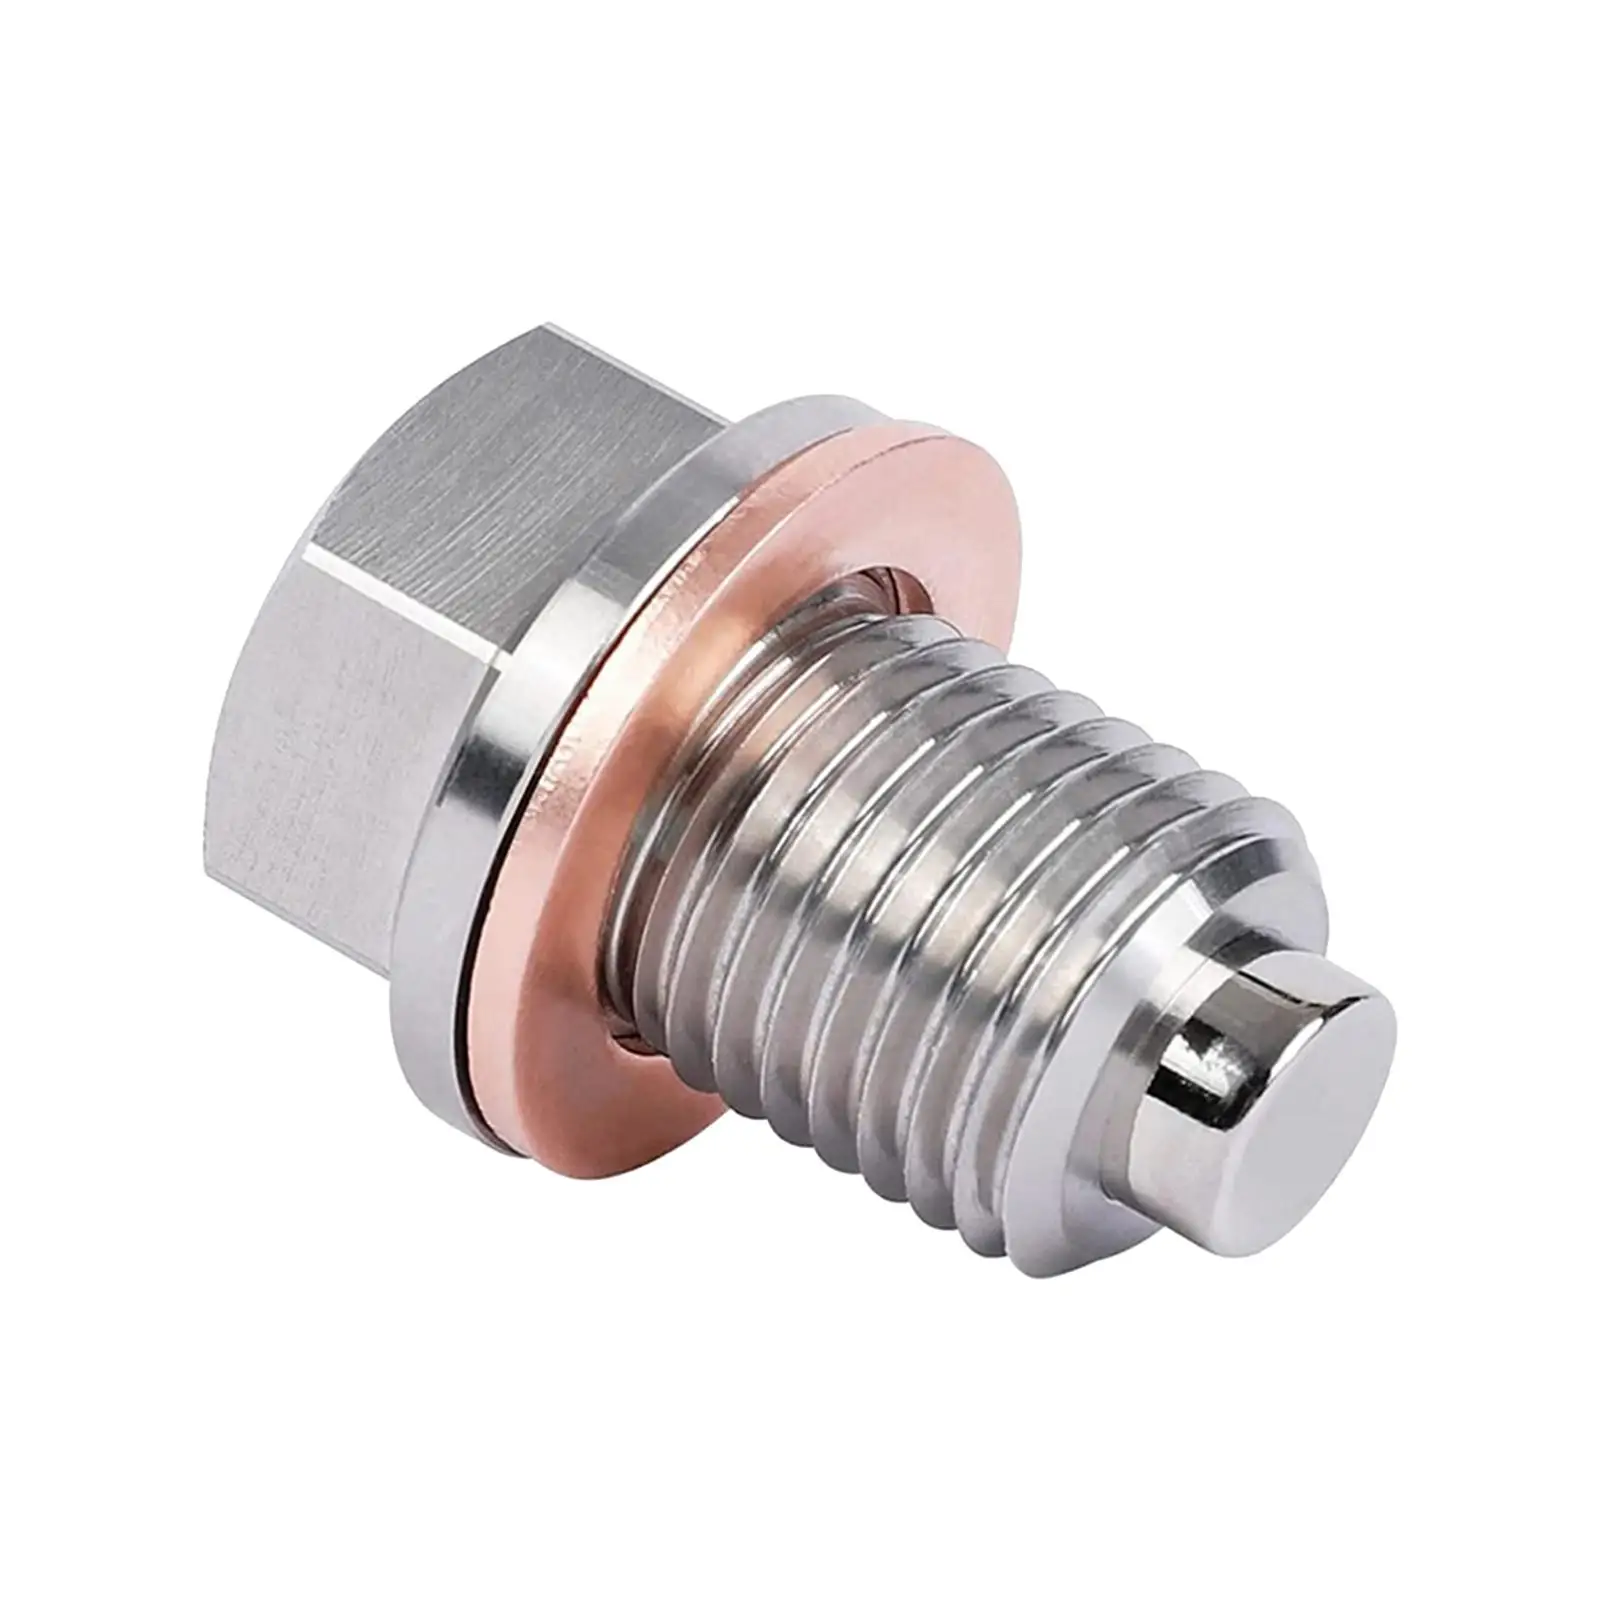 Oil Drain Plug Screw M12x1.5 Accessories Replace Reusable Easy to Install Anti Vibration Neodymium Magnet Bolt for Car